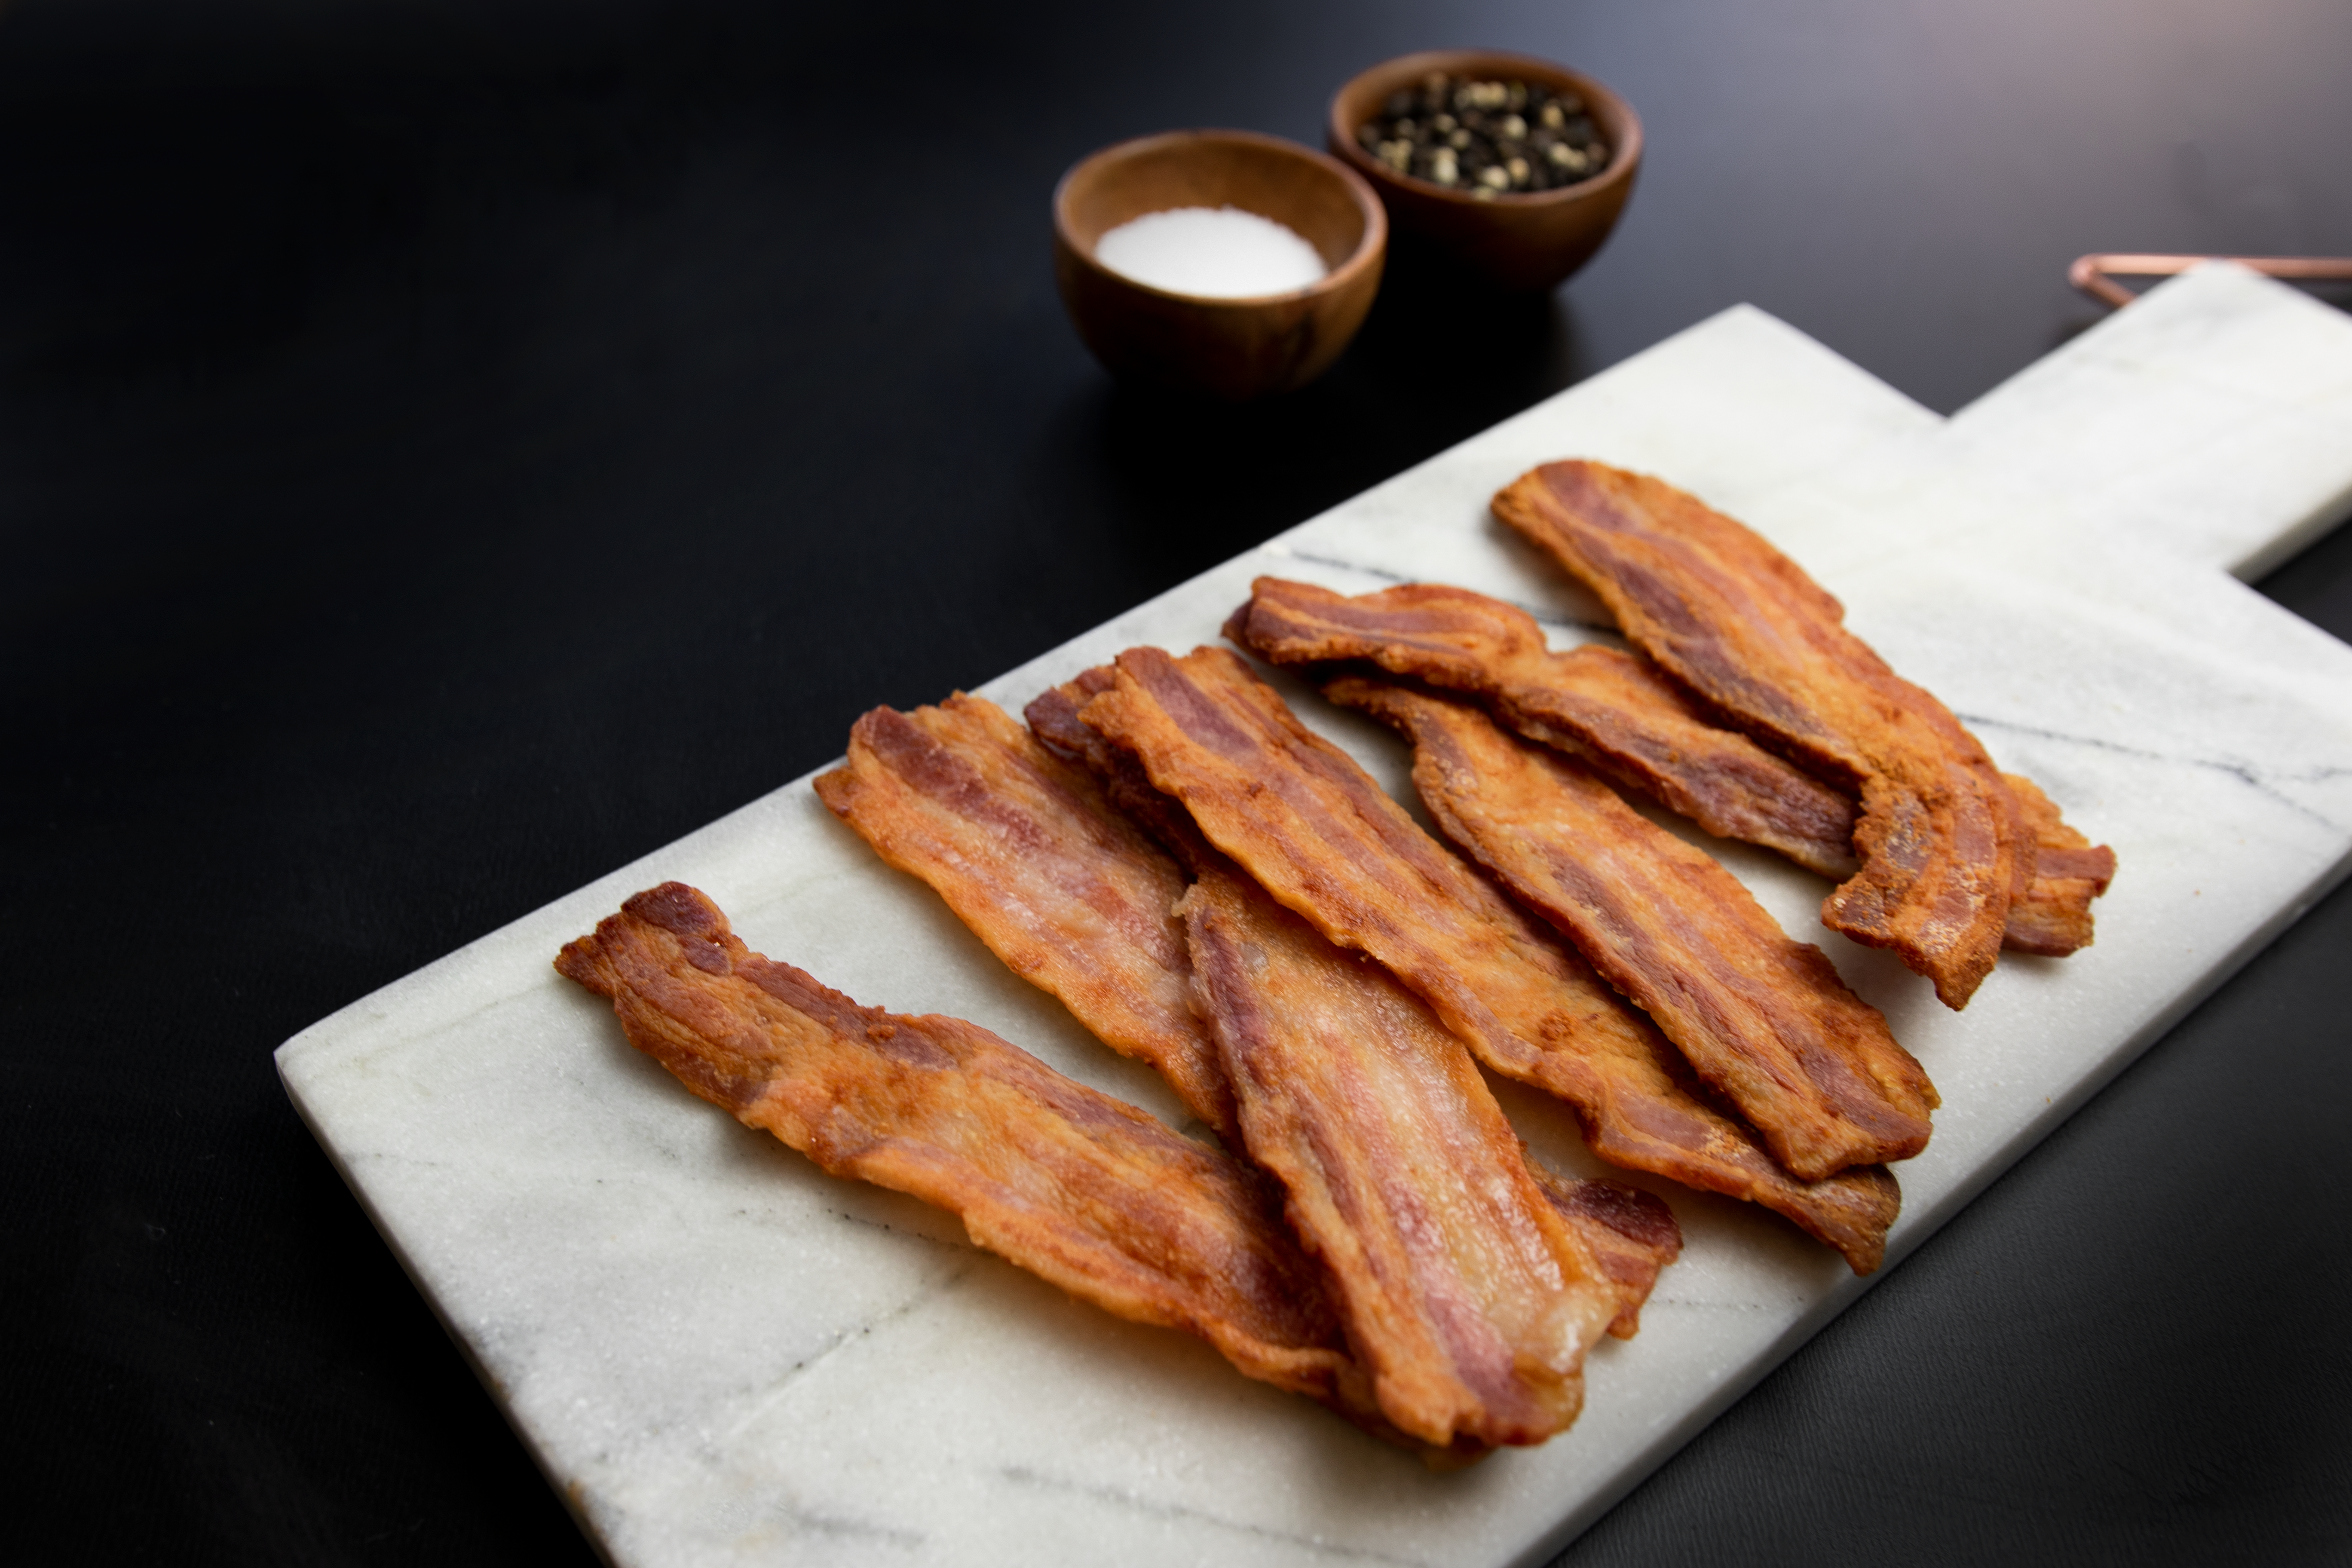 How to make bacon